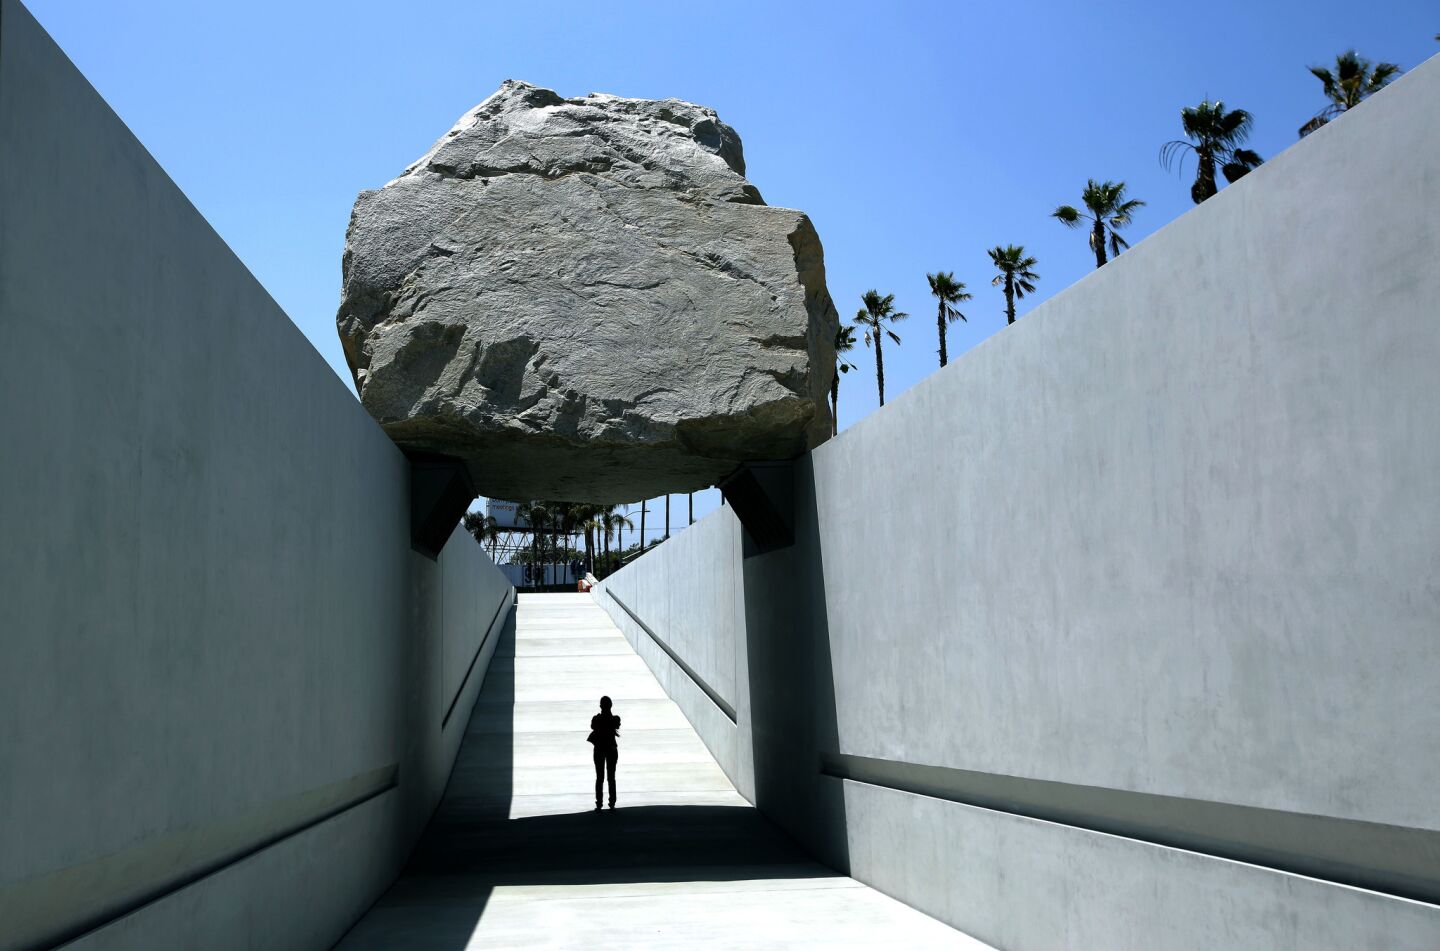 Michael Heizer's "Levitated Mass," the commissioned sculpture at the Los Angeles County Museum of Art, gives visitors the chance to walk underneath a 340-ton granite boulder. Review: LACMA's new hunk 'Levitated Mass' has some substance | Critic's Notebook: Art on an architectural scale at LACMA